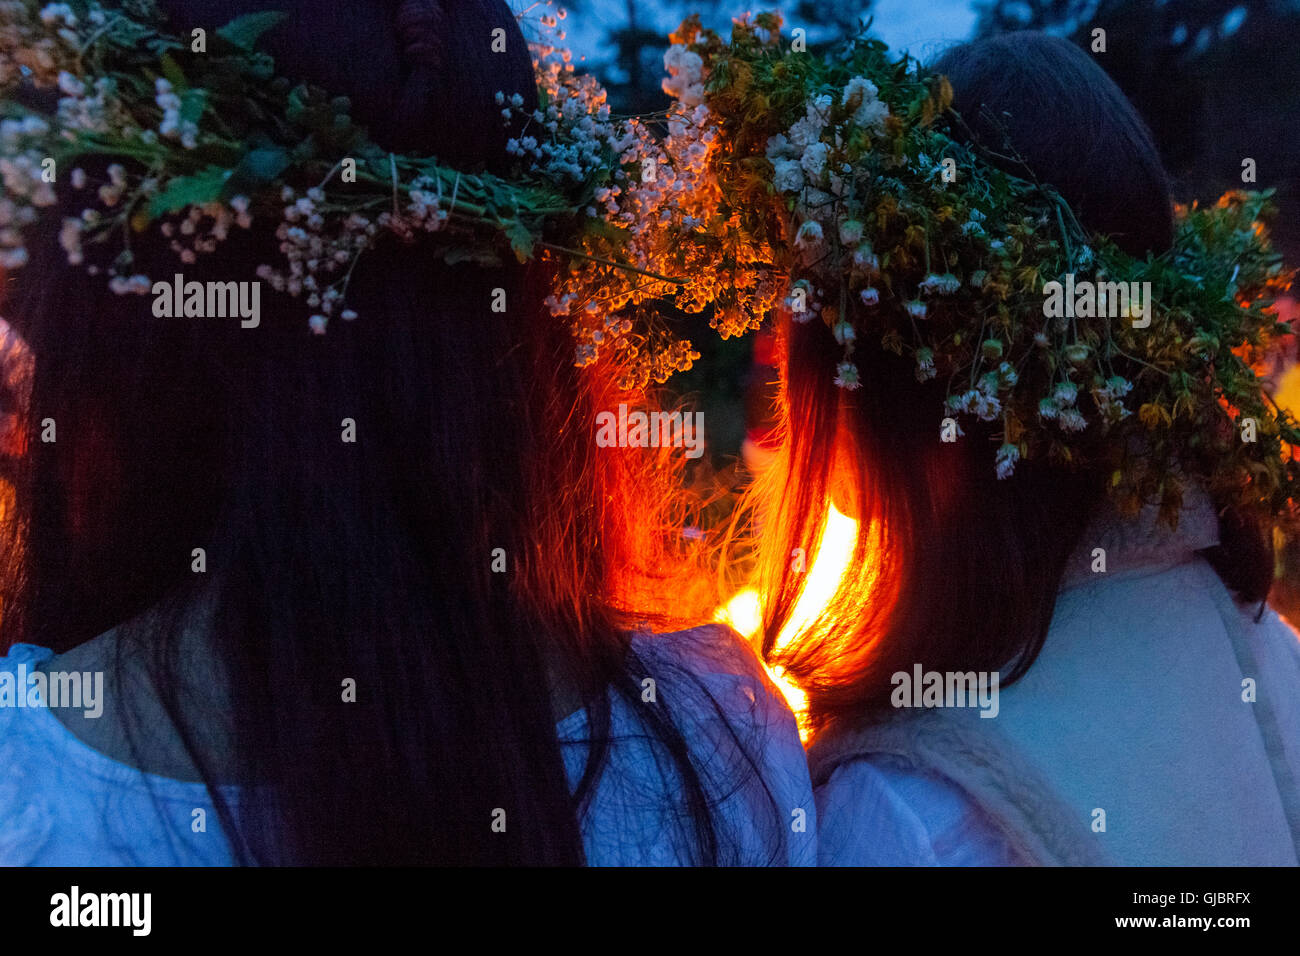 Midsummer Night, girls in wreaths on his head, by the fire, Podlasie, Poland, Stock Photo